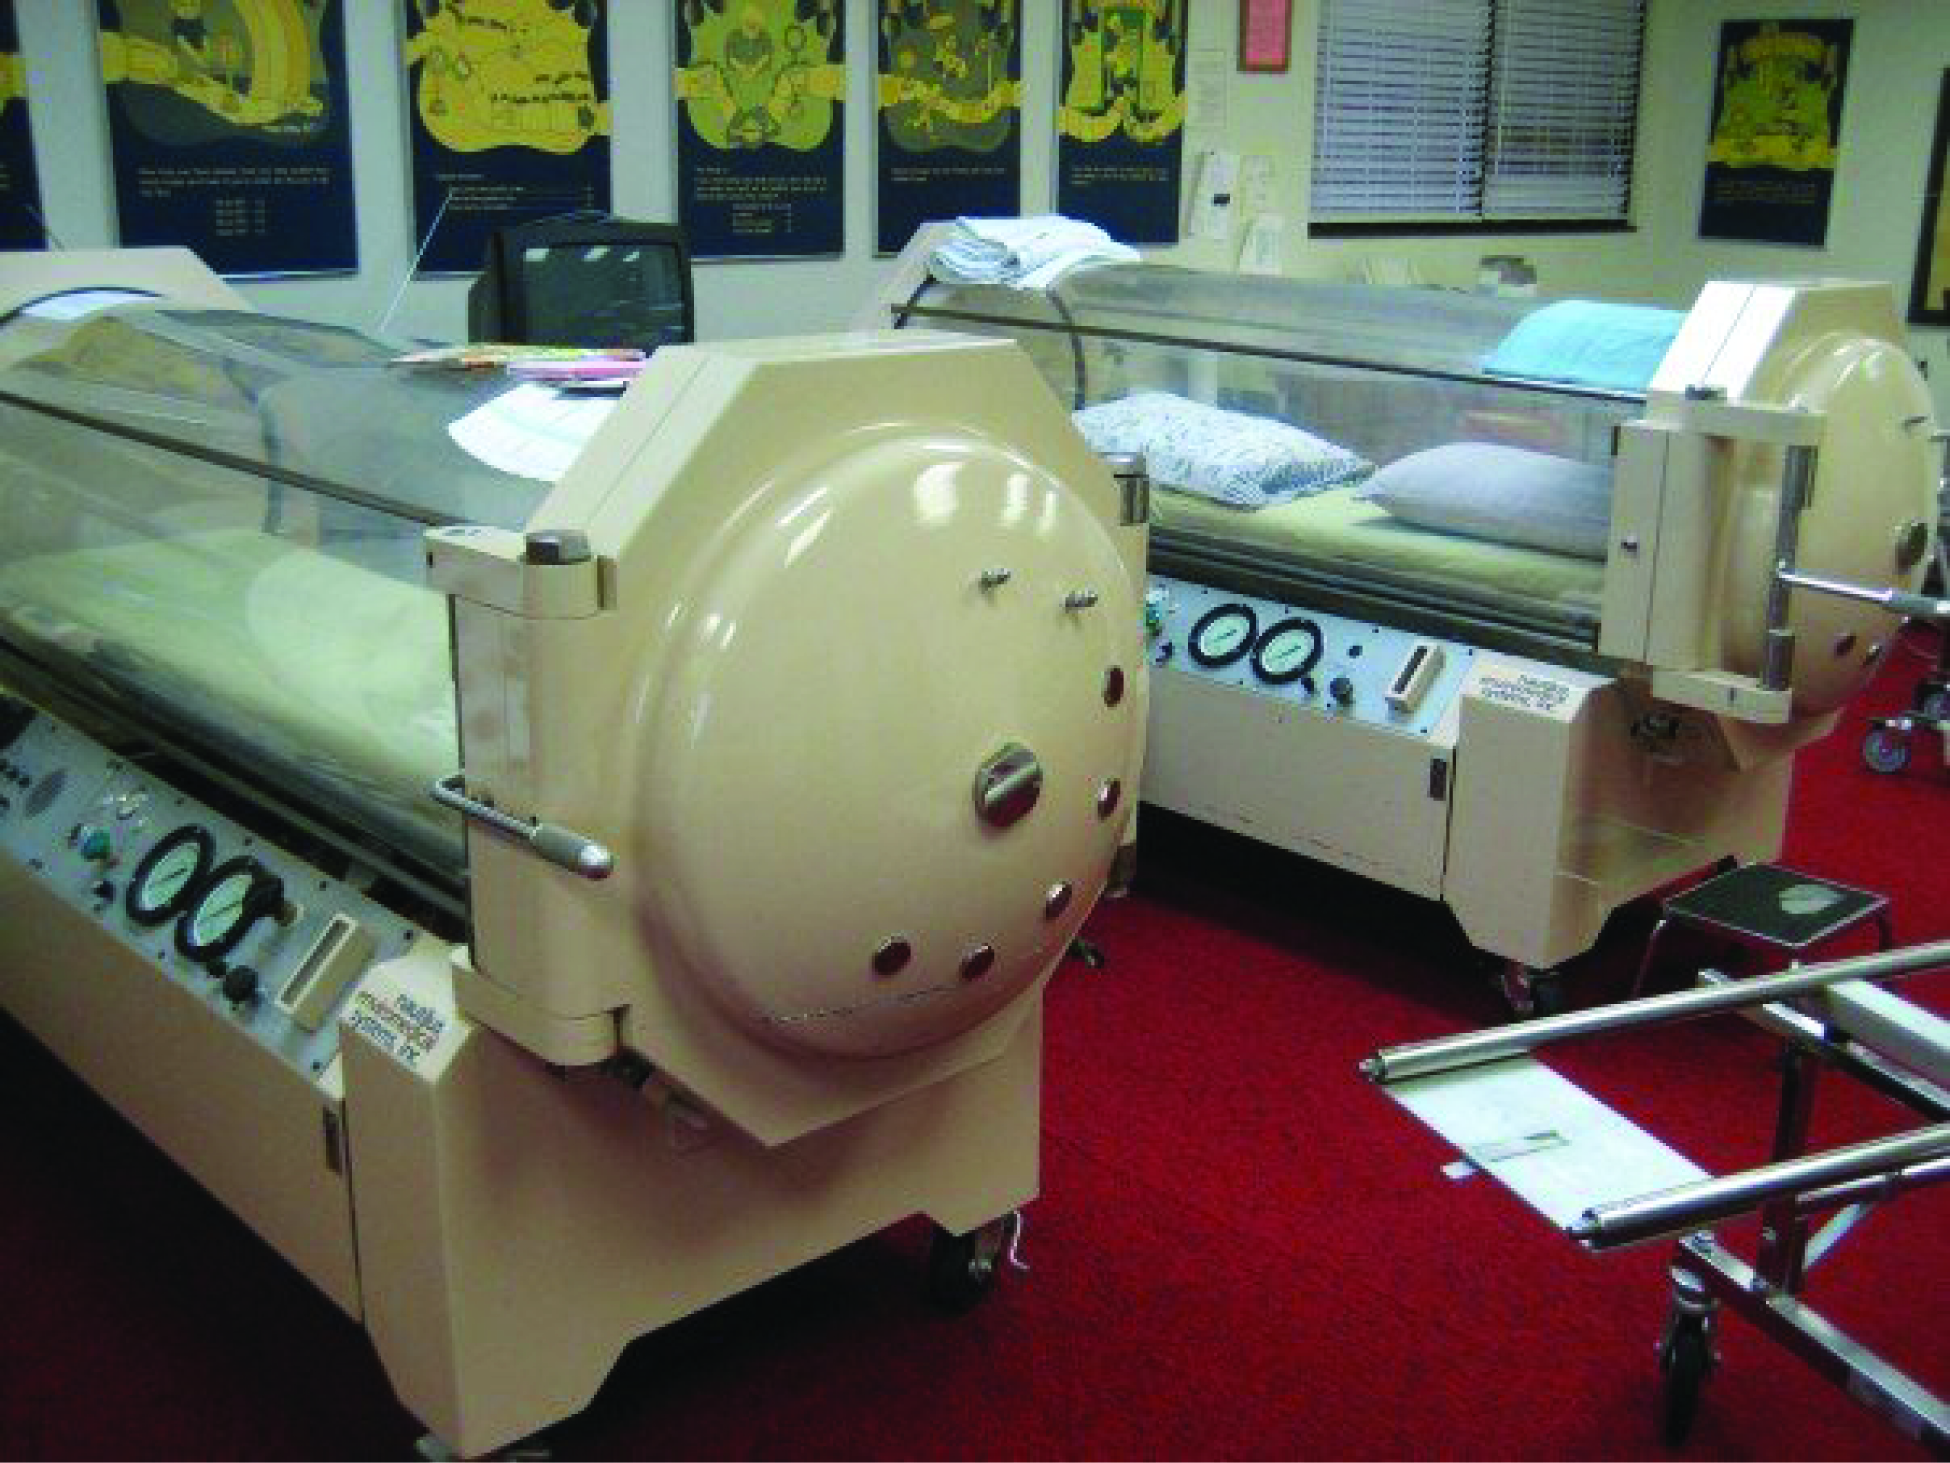 This photo shows two hyperbaric chambers.